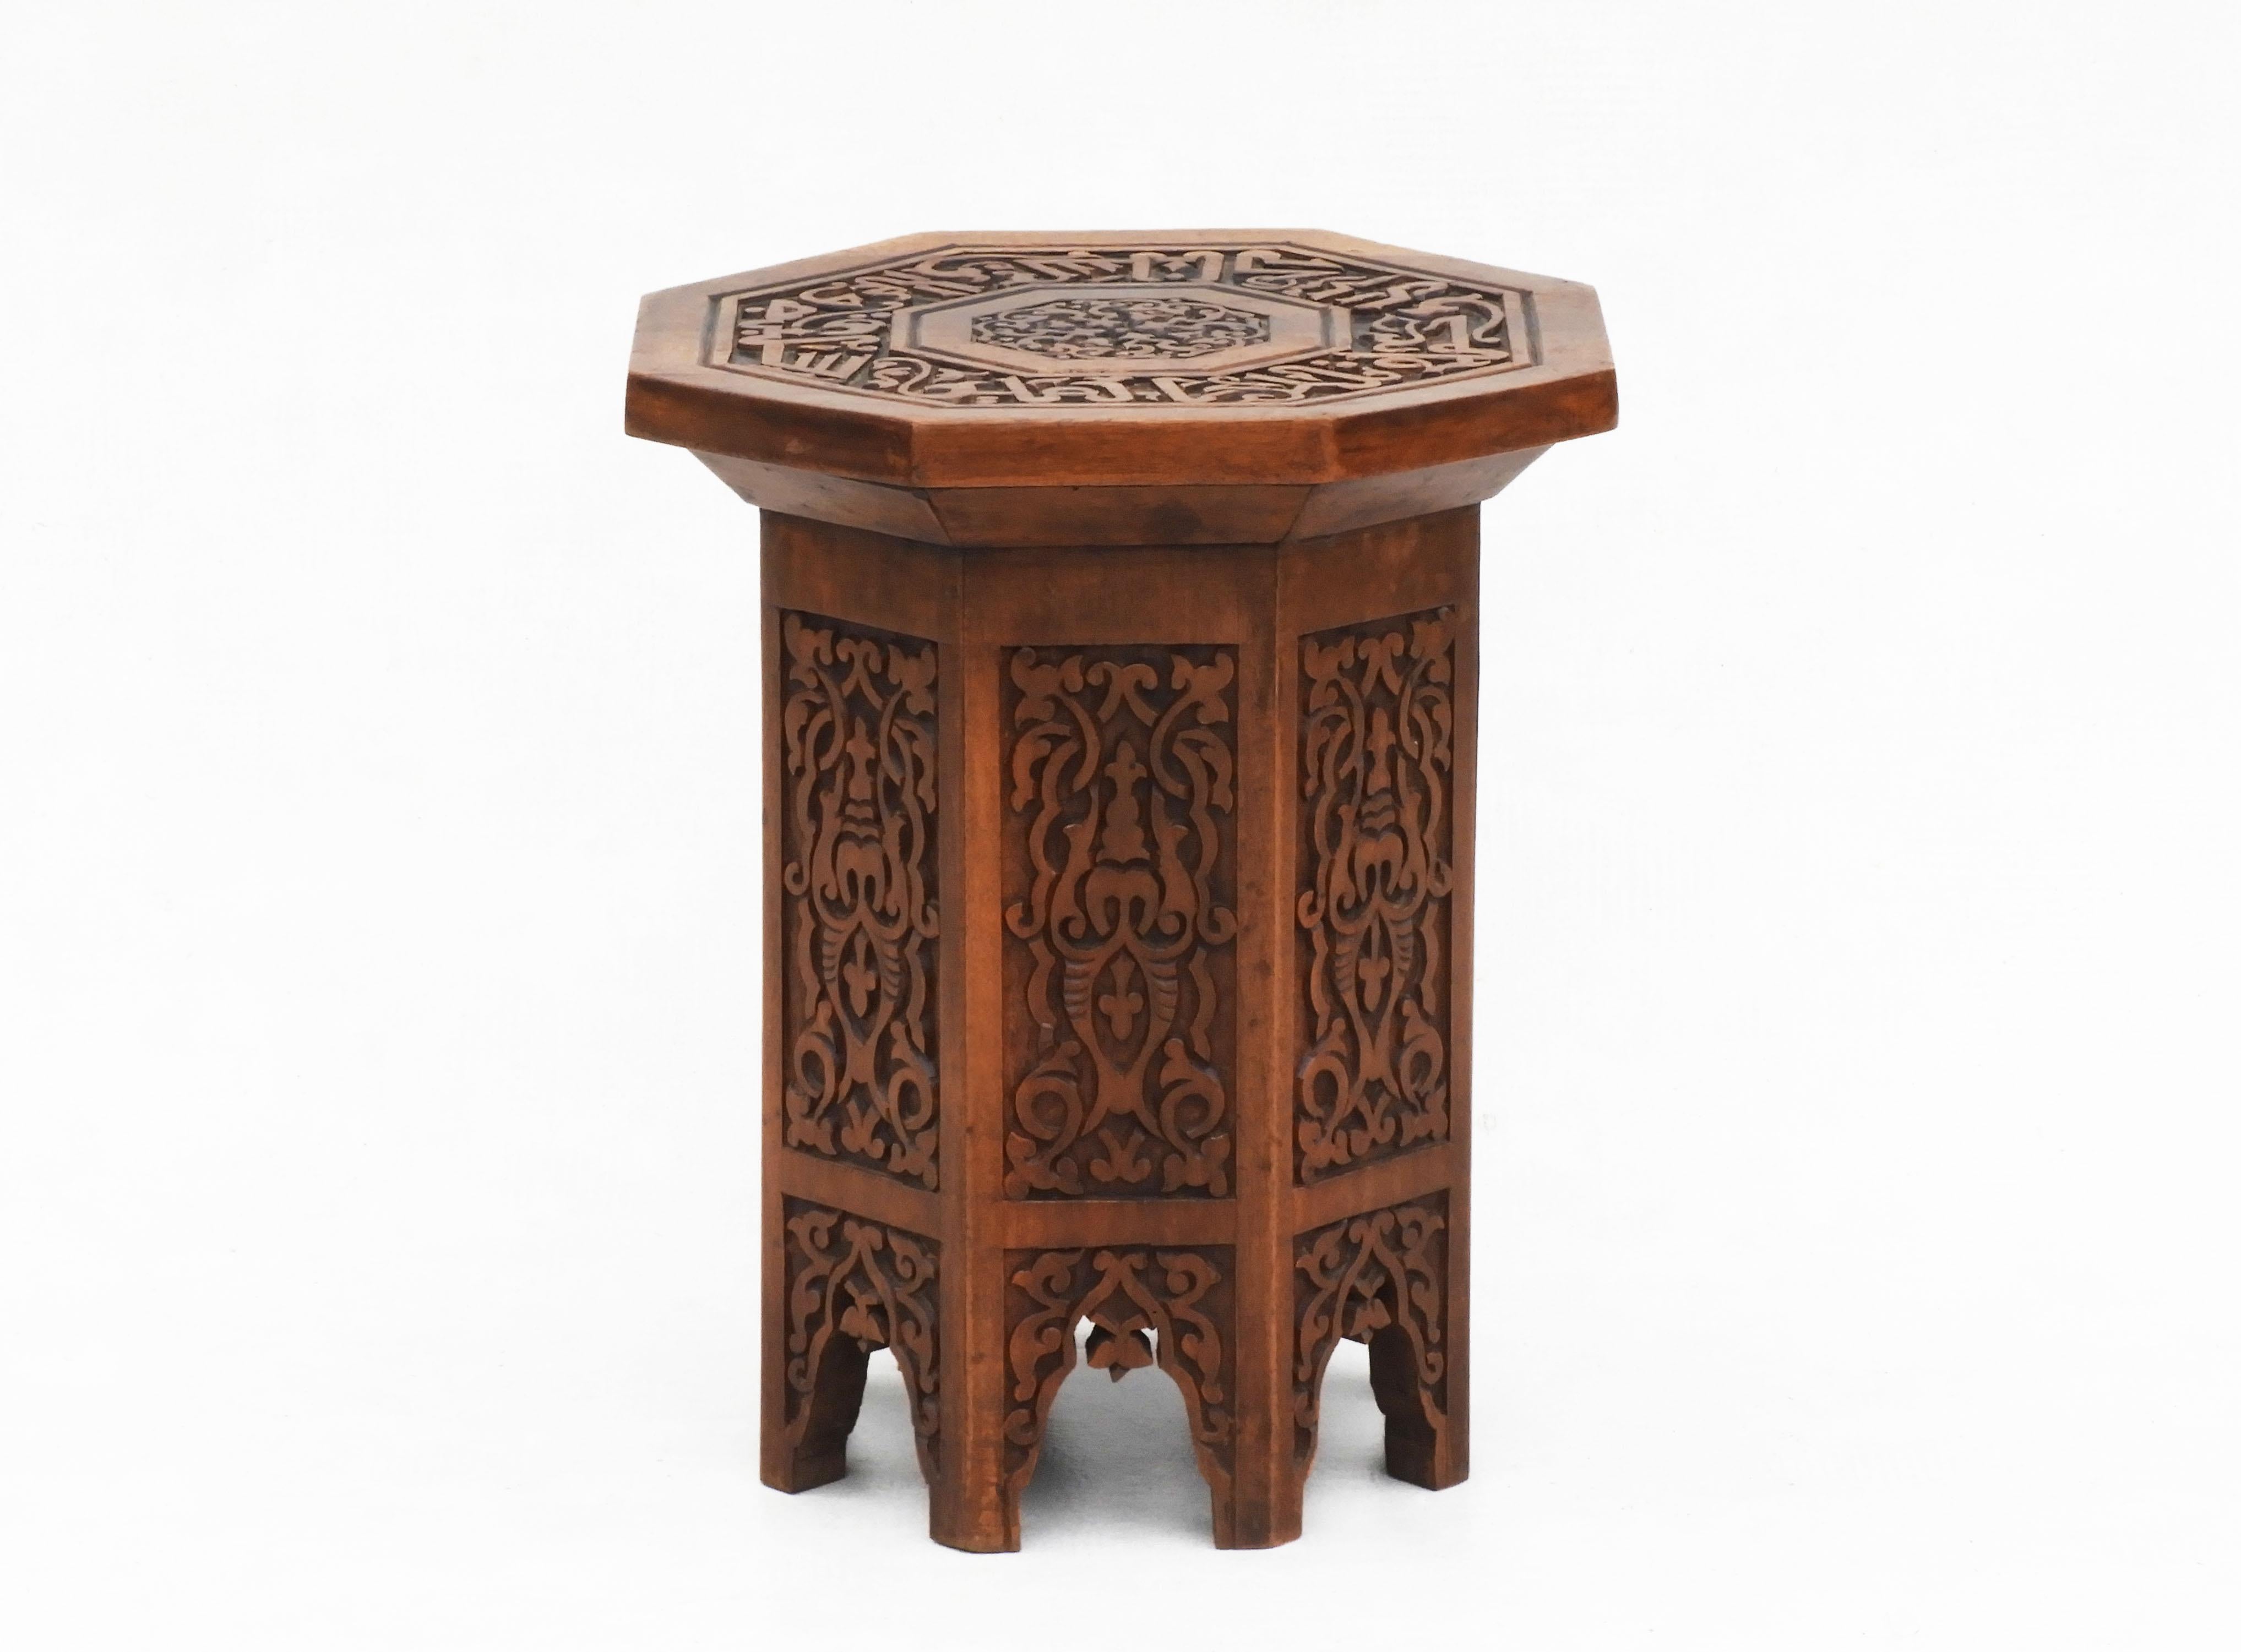 Moroccan hardwood side table or tabouret stool. Attractive arched octagonal form in deep relief with both calligraphic and Moorish geometrical designs. A nice Bohemian accent addition to any room.  In good condition, sturdy and strong with a nice